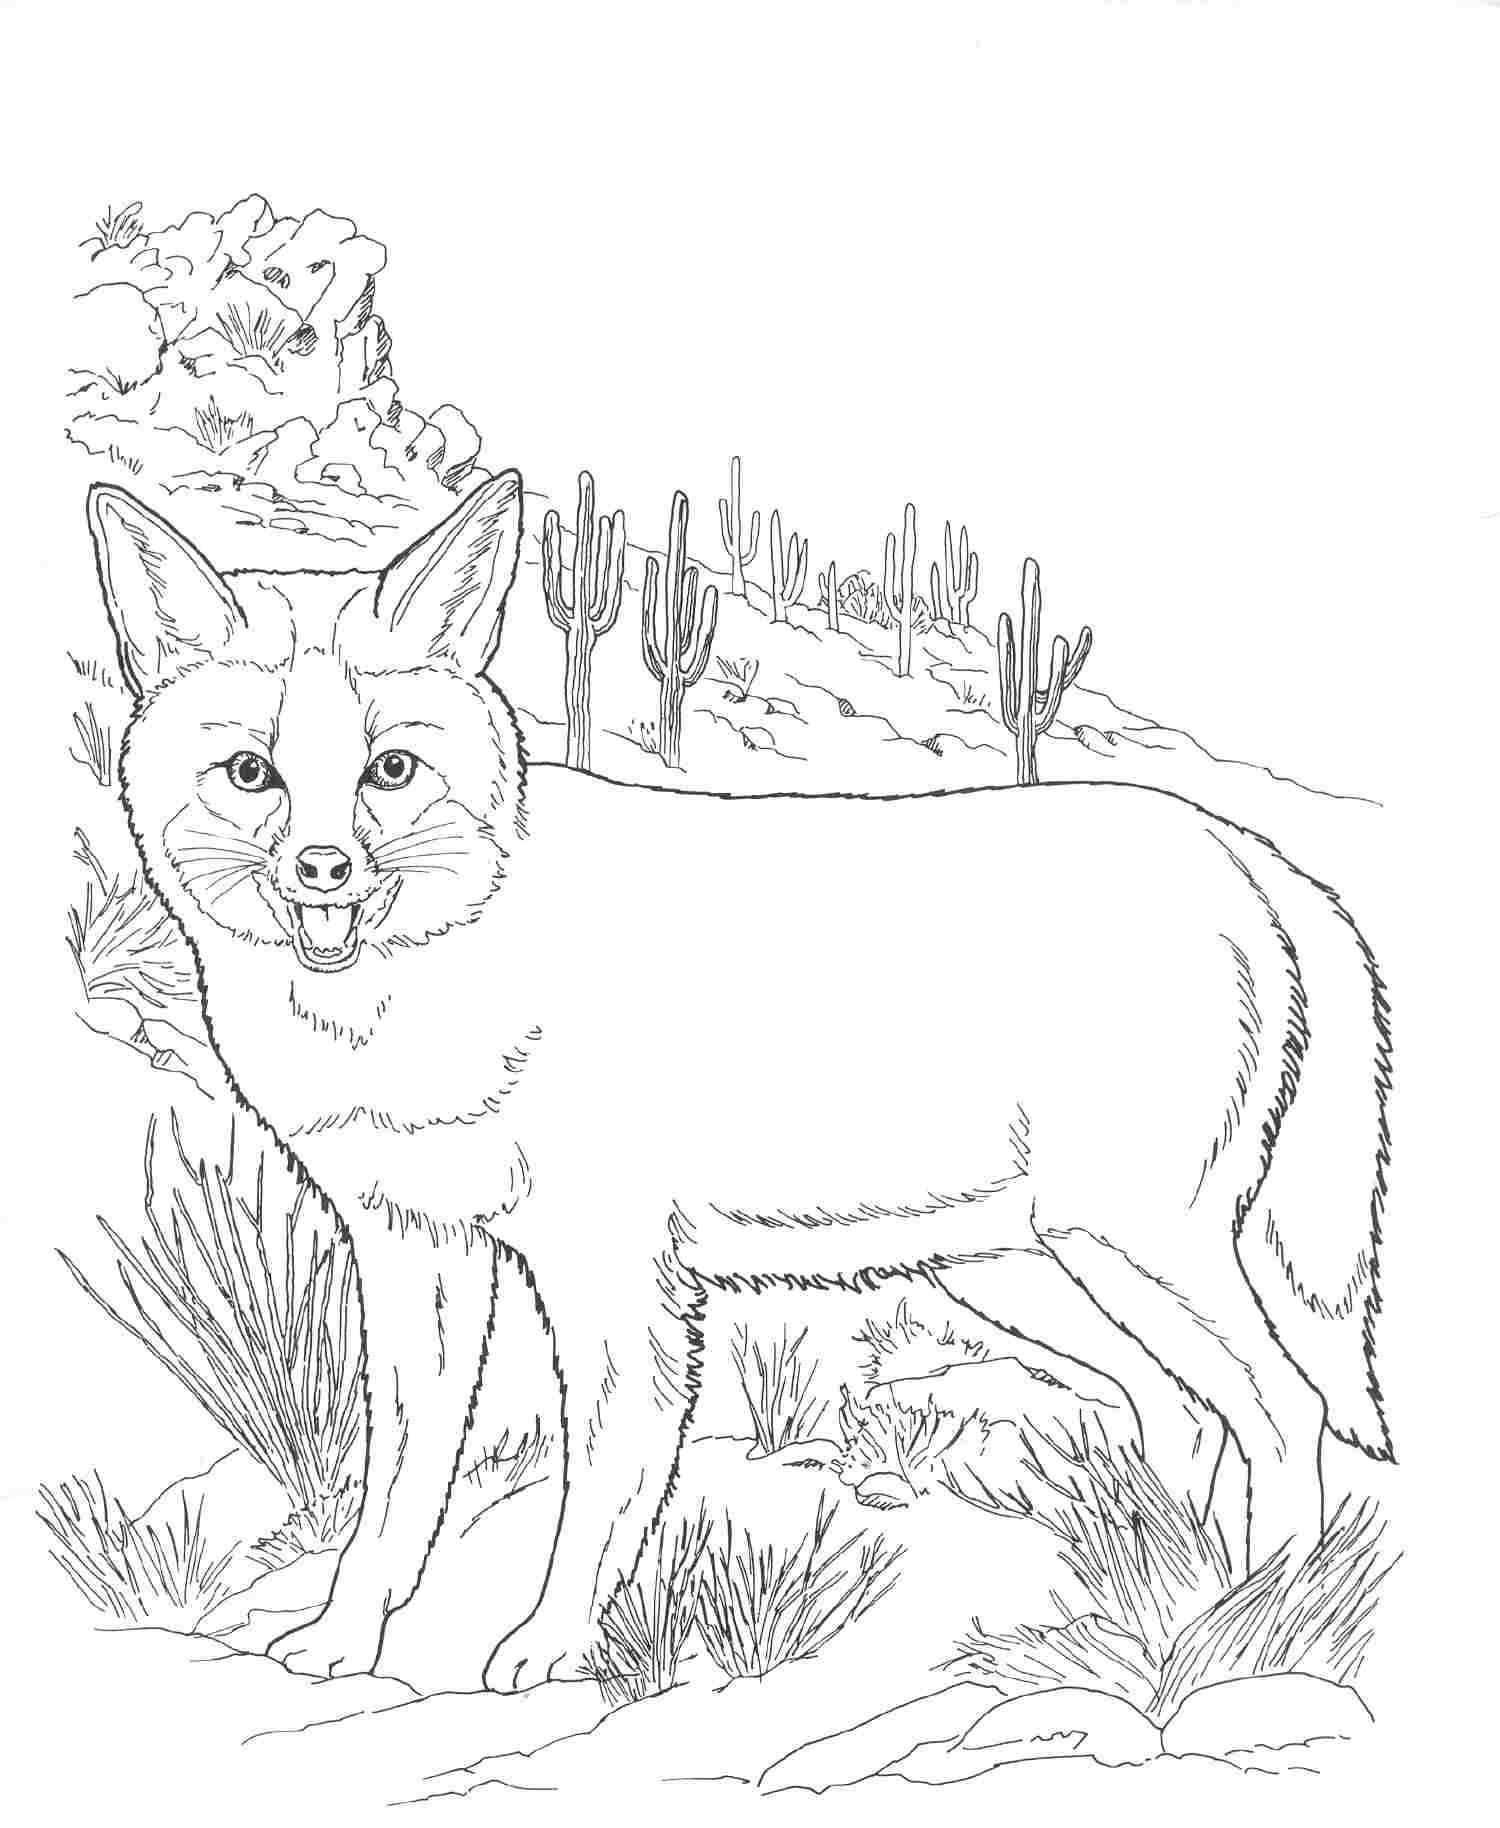 30 Coloring Pages Desert | Coloring Pages | Pinterest | Animal - Free Printable Desert Animals